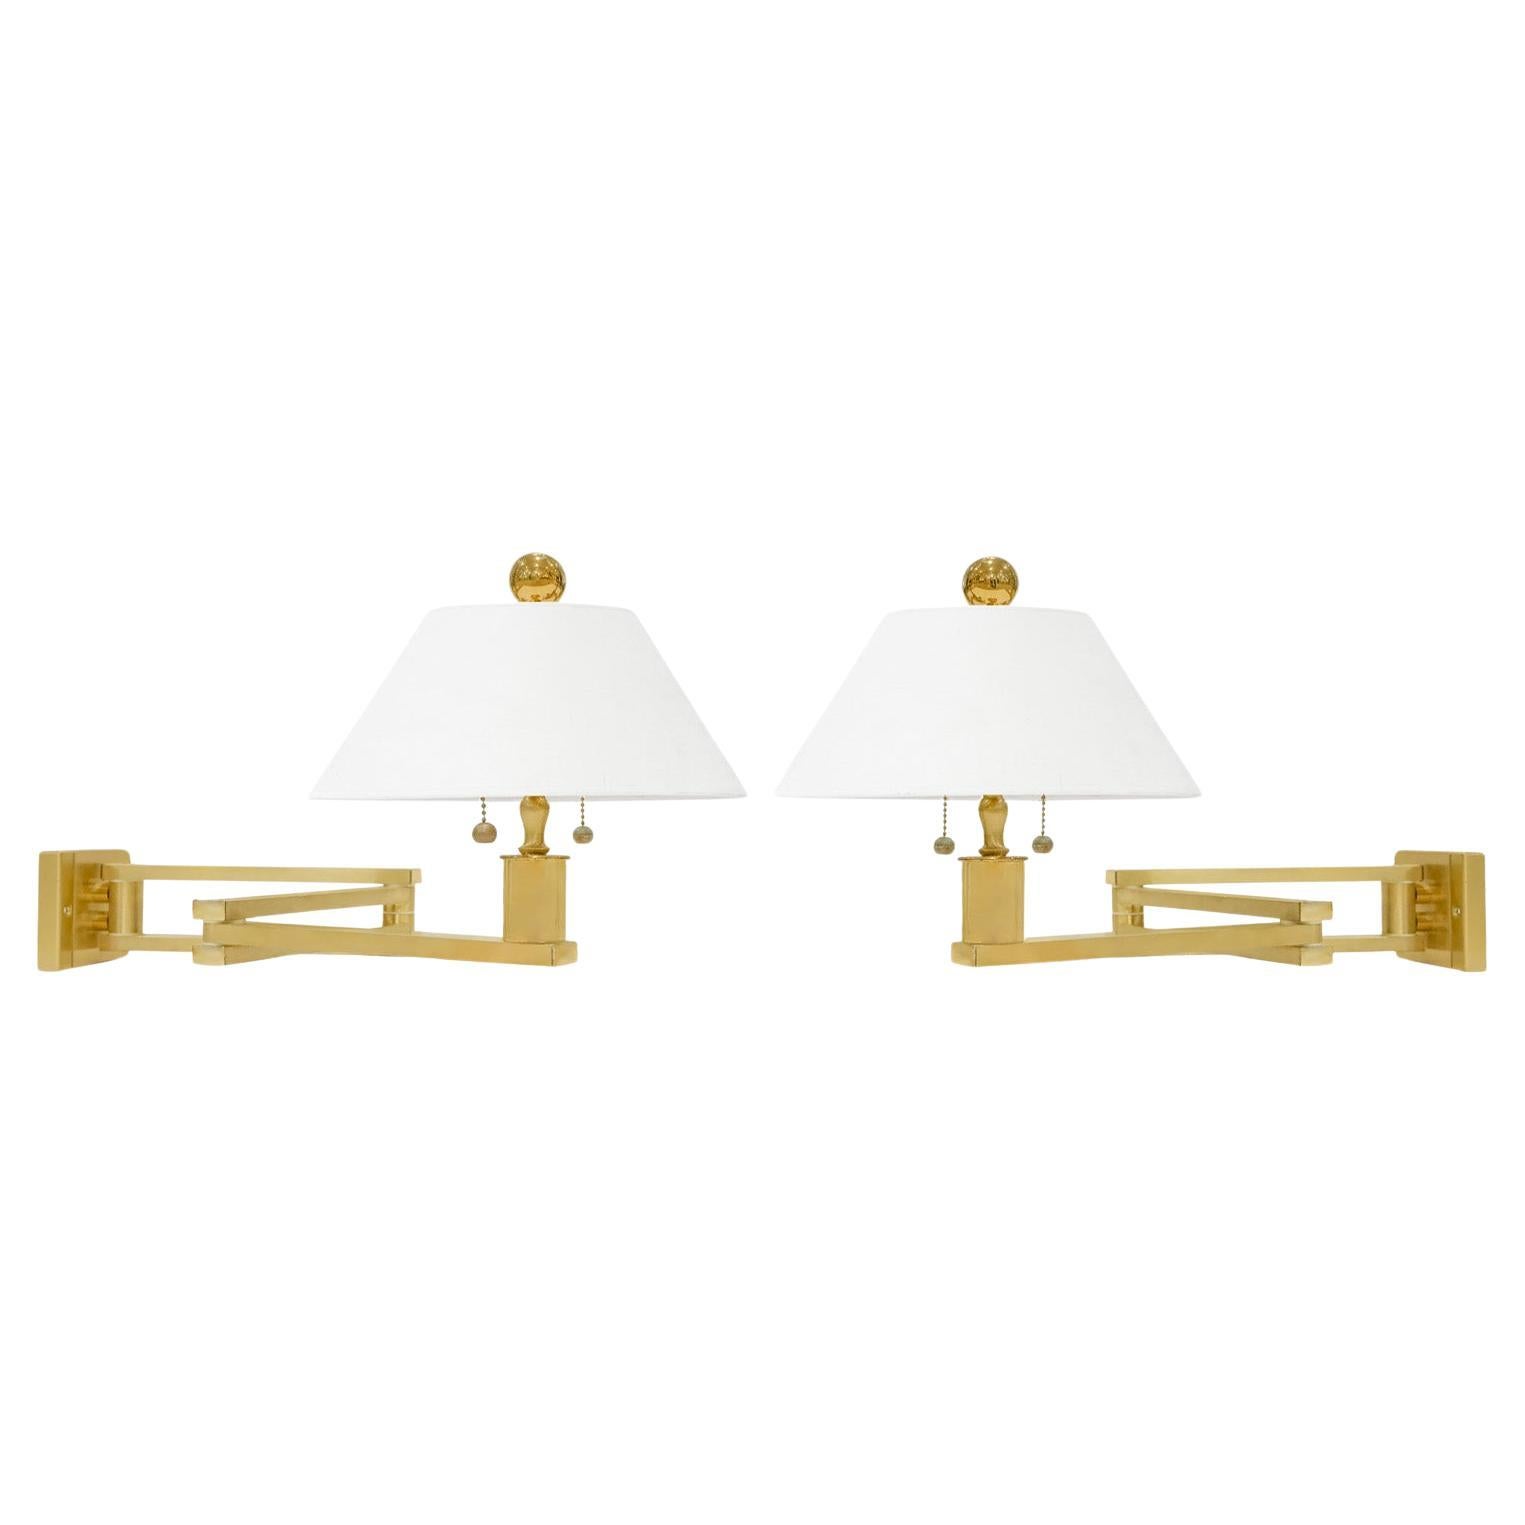 Ron Seff Pair of Superb Swing Arm Wall Lamps in Satin Brass 1980s